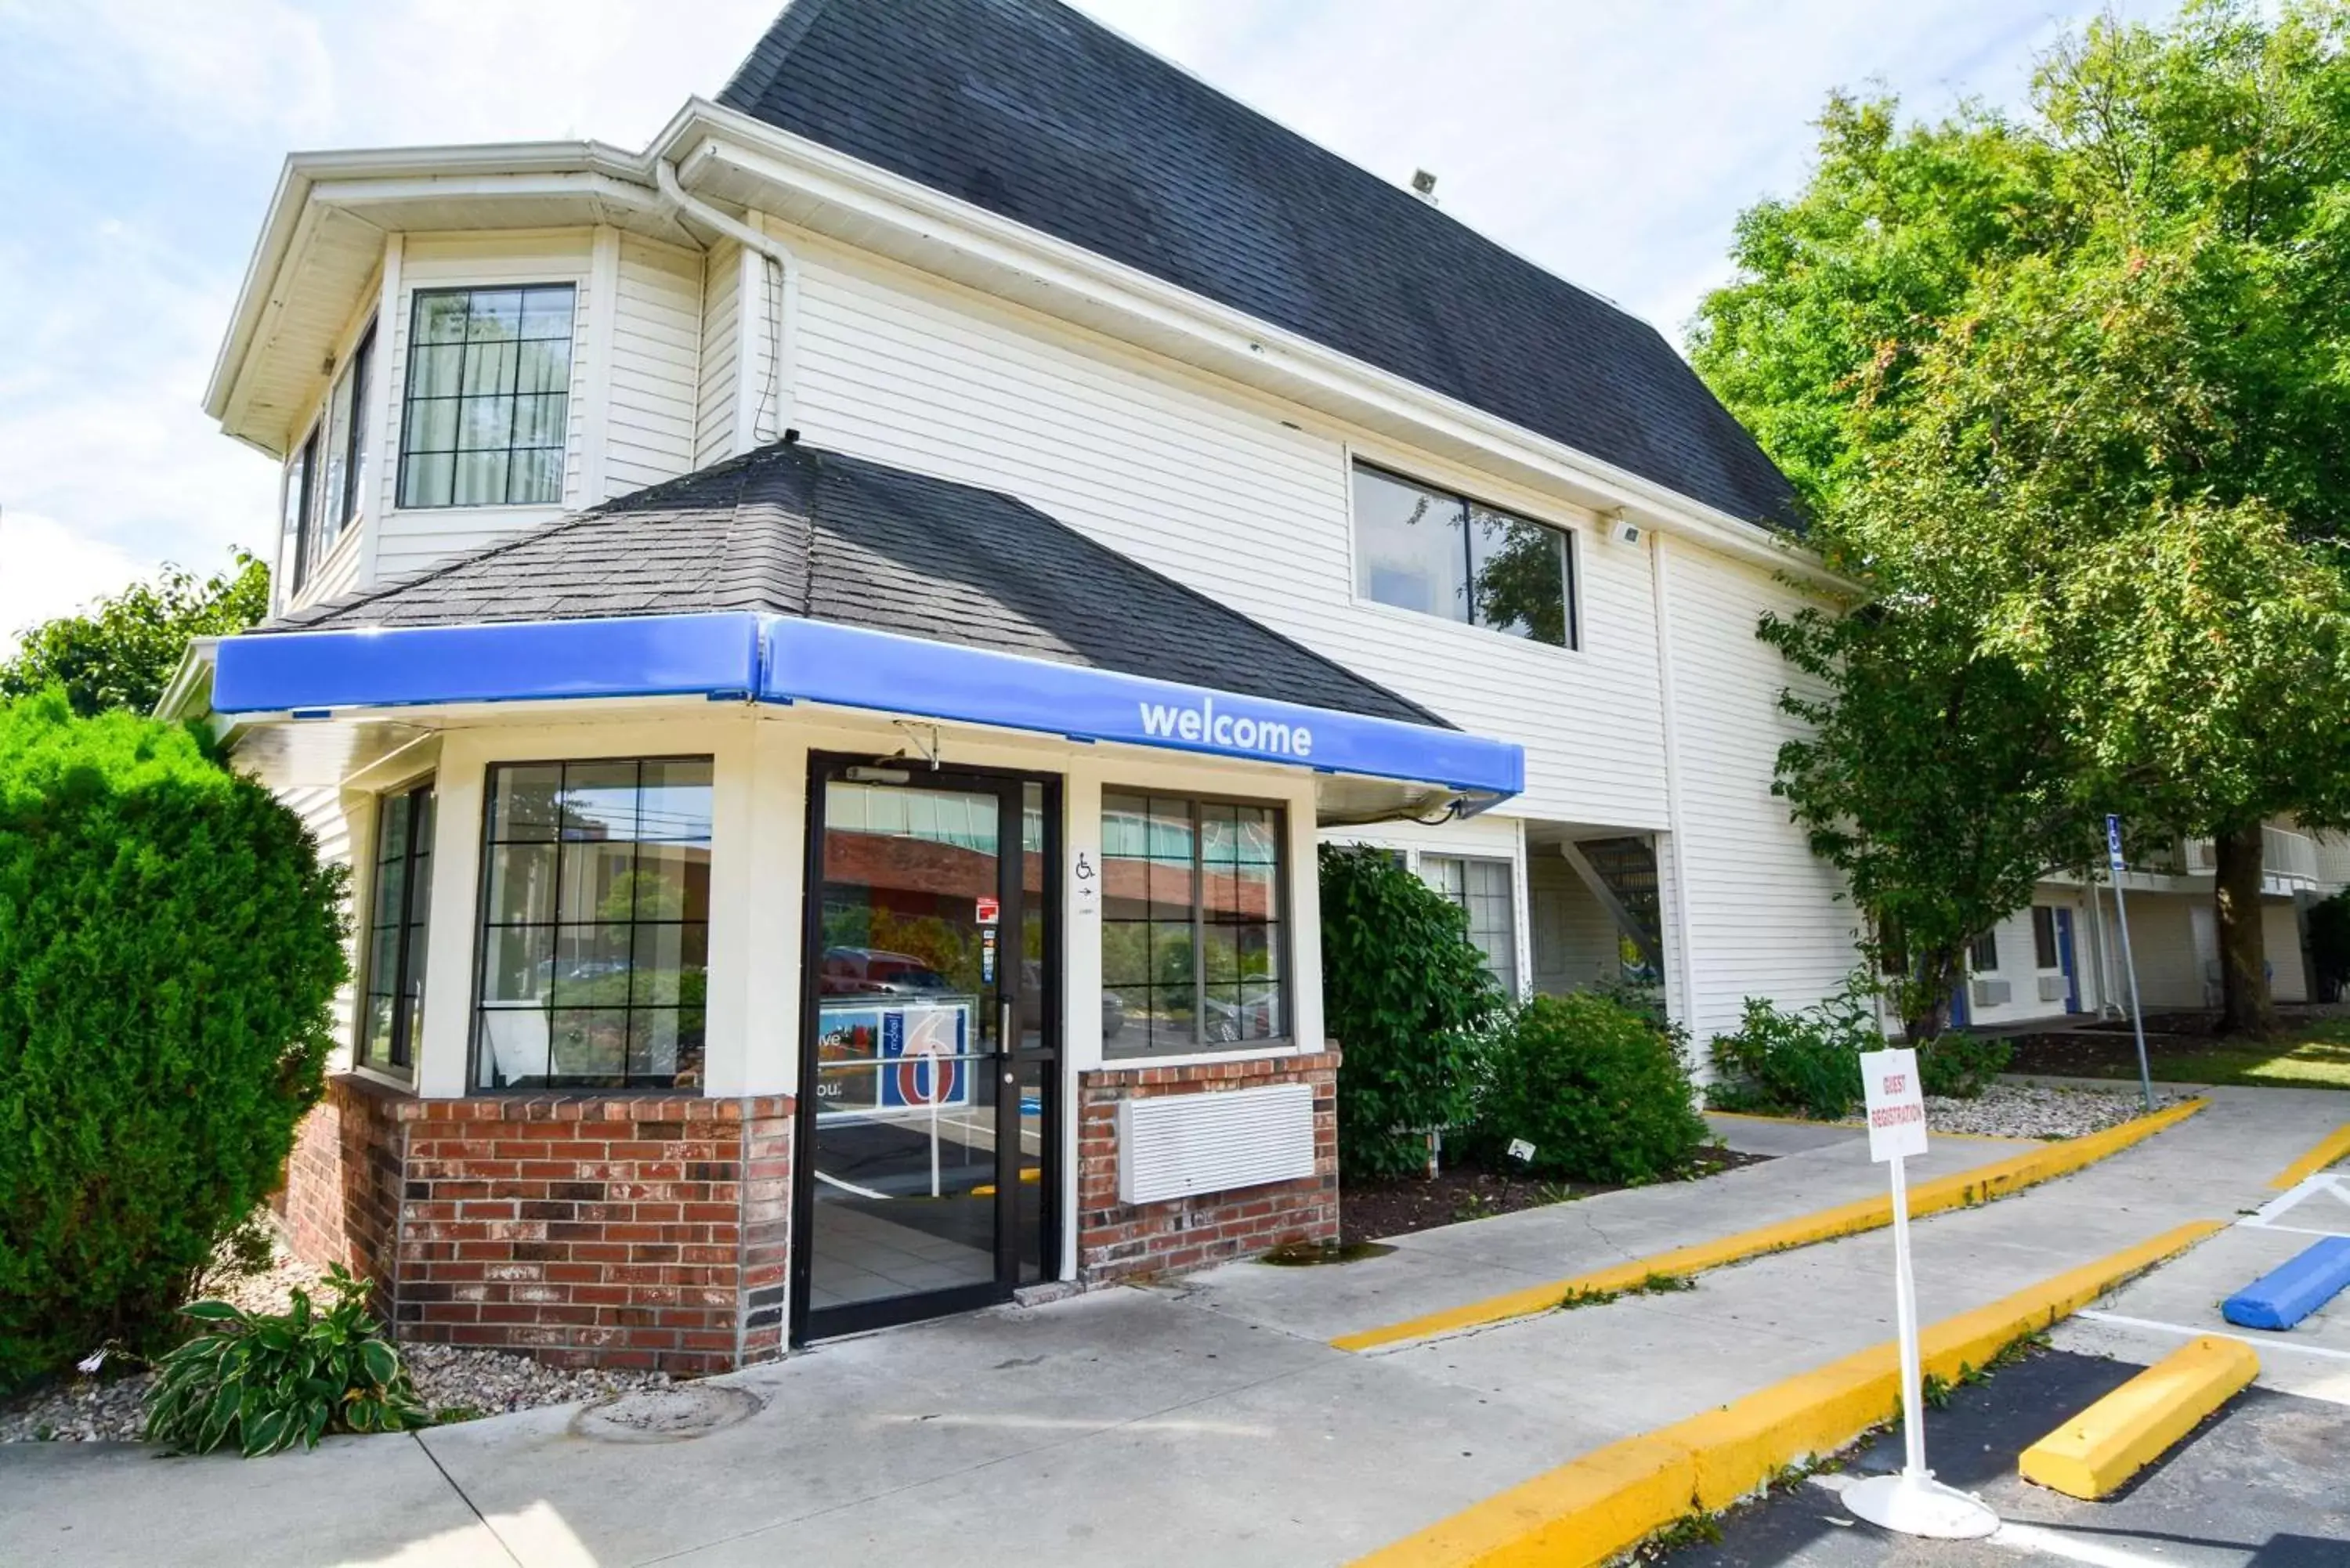 Property building in Motel 6-Wethersfield, CT - Hartford